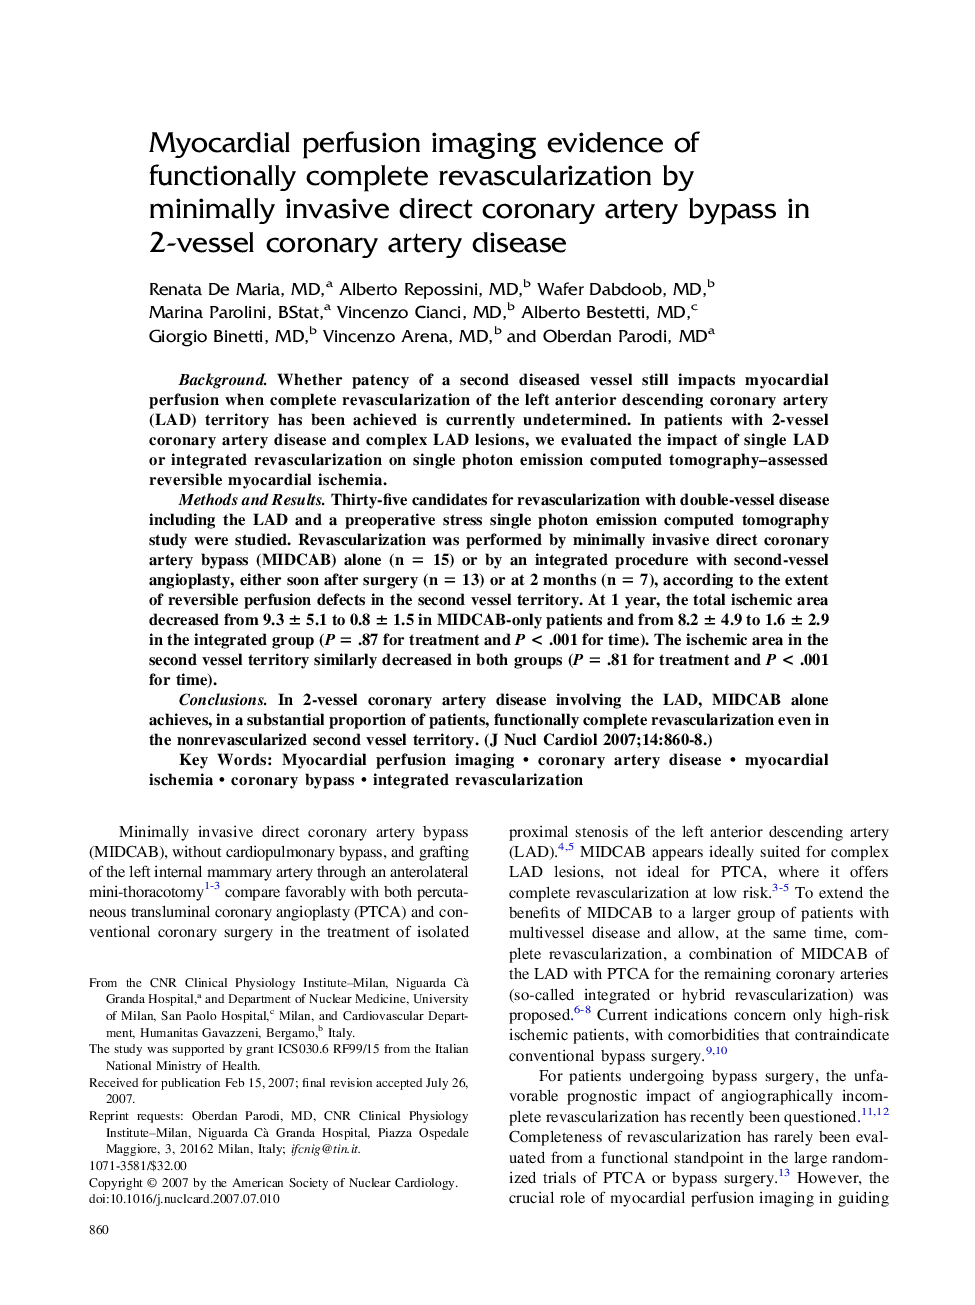 Myocardial perfusion imaging evidence of functionally complete revascularization by minimally invasive direct coronary artery bypass in 2-vessel coronary artery disease